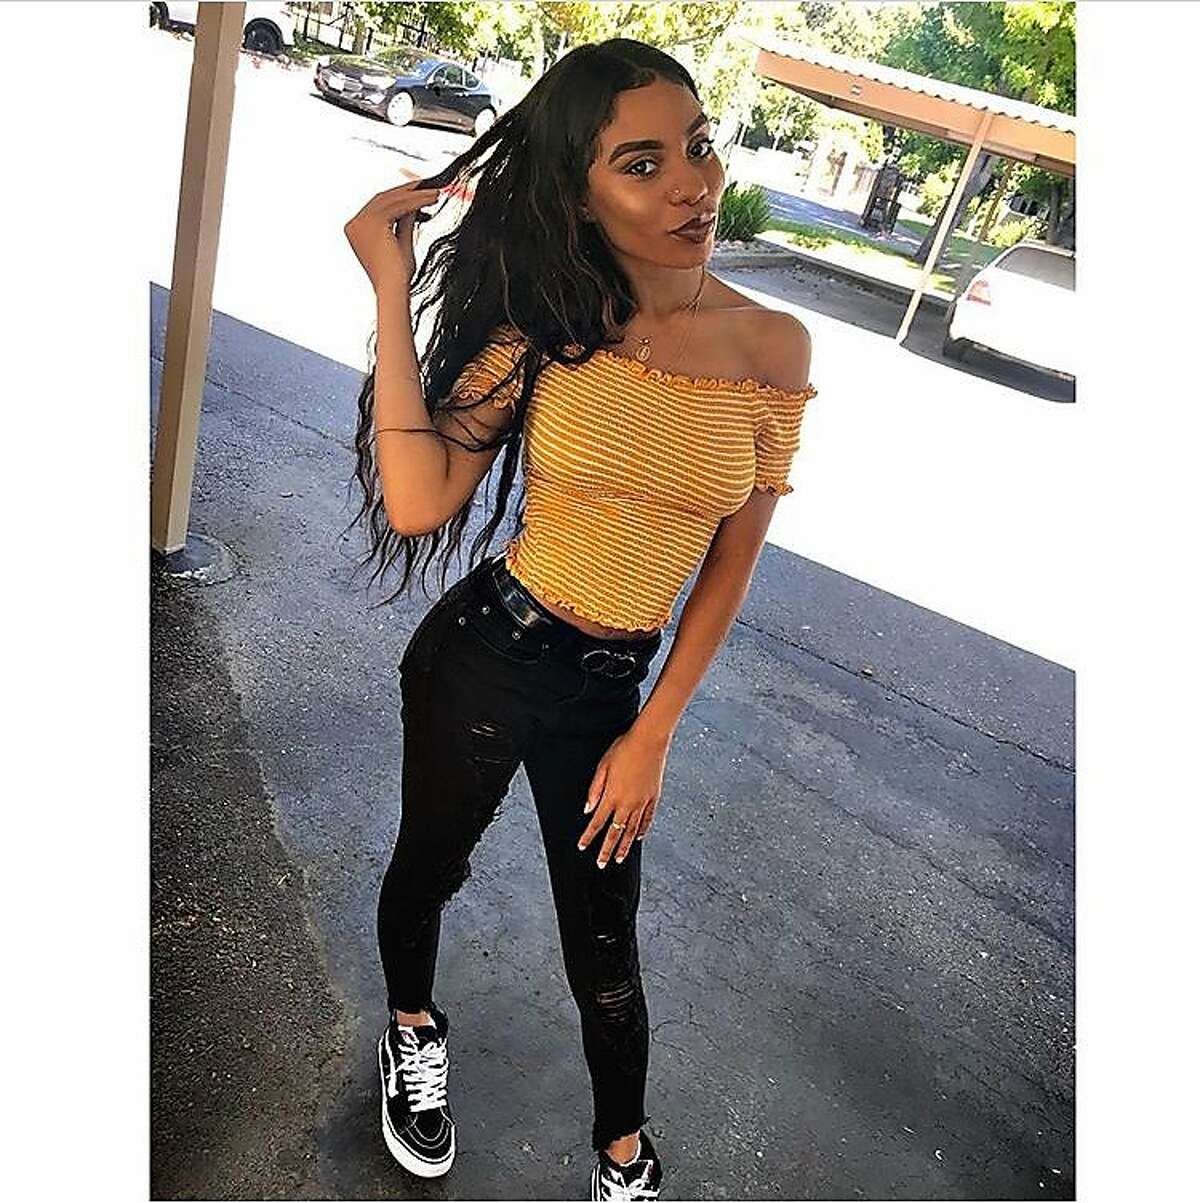 Nia Wilson, 18, of Oakland, was identified by family members as the victim of a fatal stabbing at BART's MacArthur Station on Sunday, July 22, 2018.